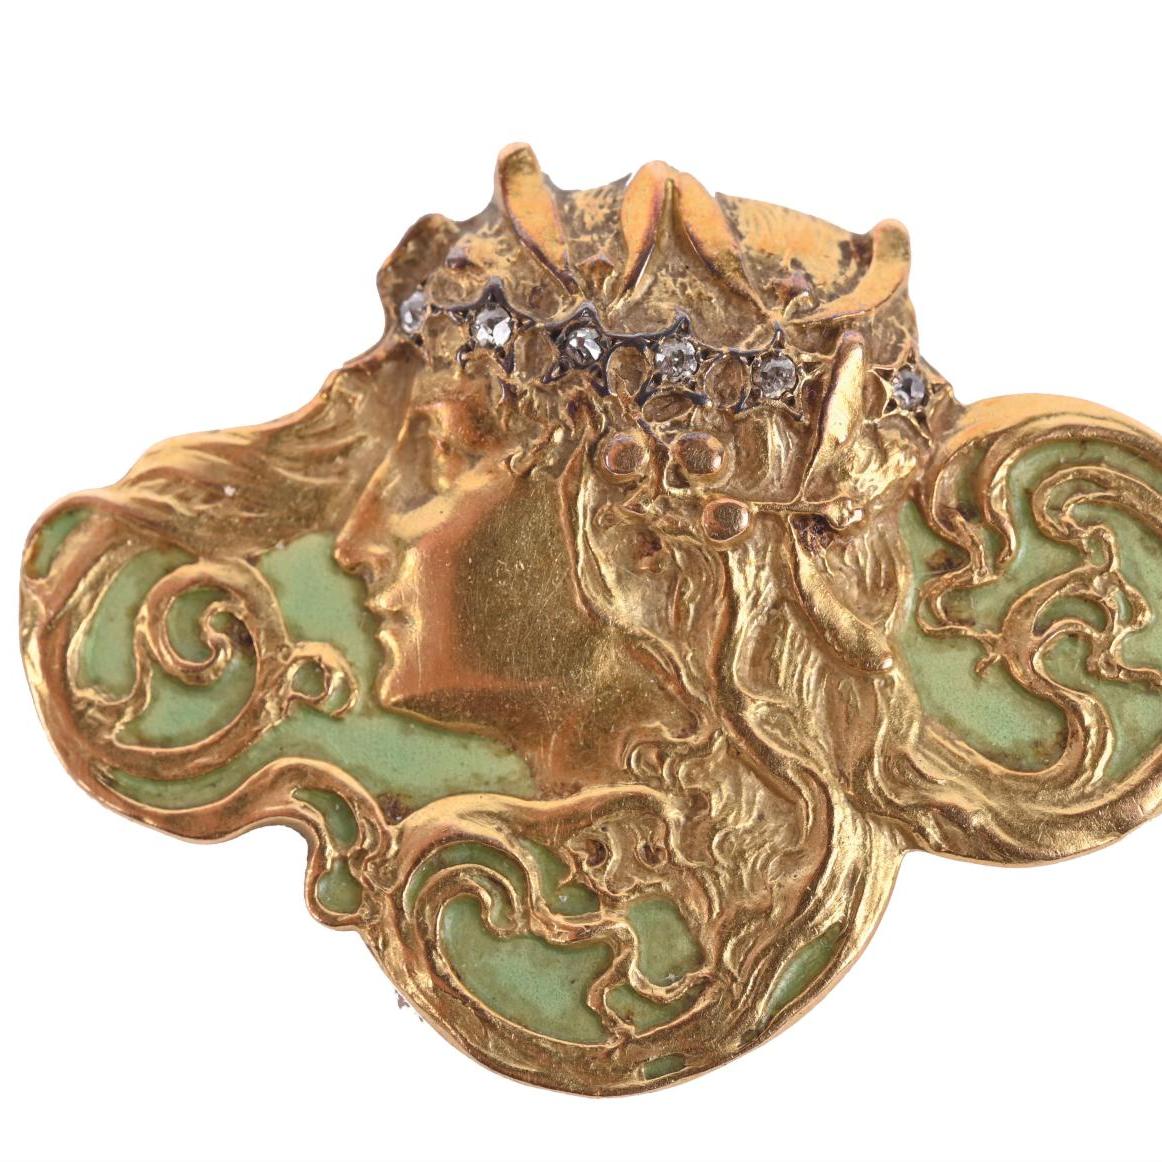 Lalique’s Inspired Art Nouveau Jewelry - Lots sold